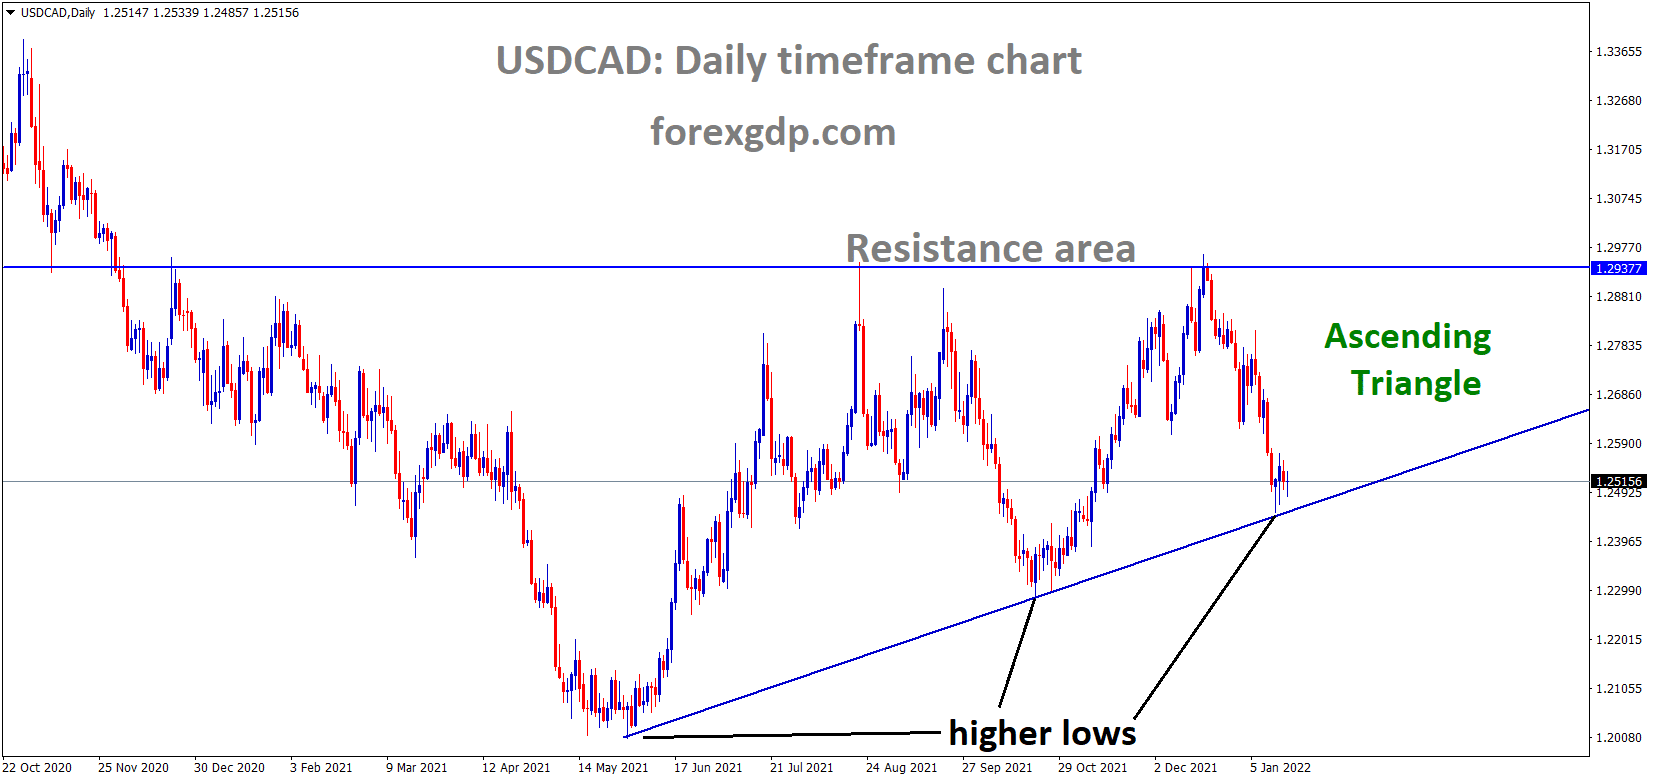 USDCAD is moving in an ascending triangle pattern and the market is consolidated at the higher low area of the pattern